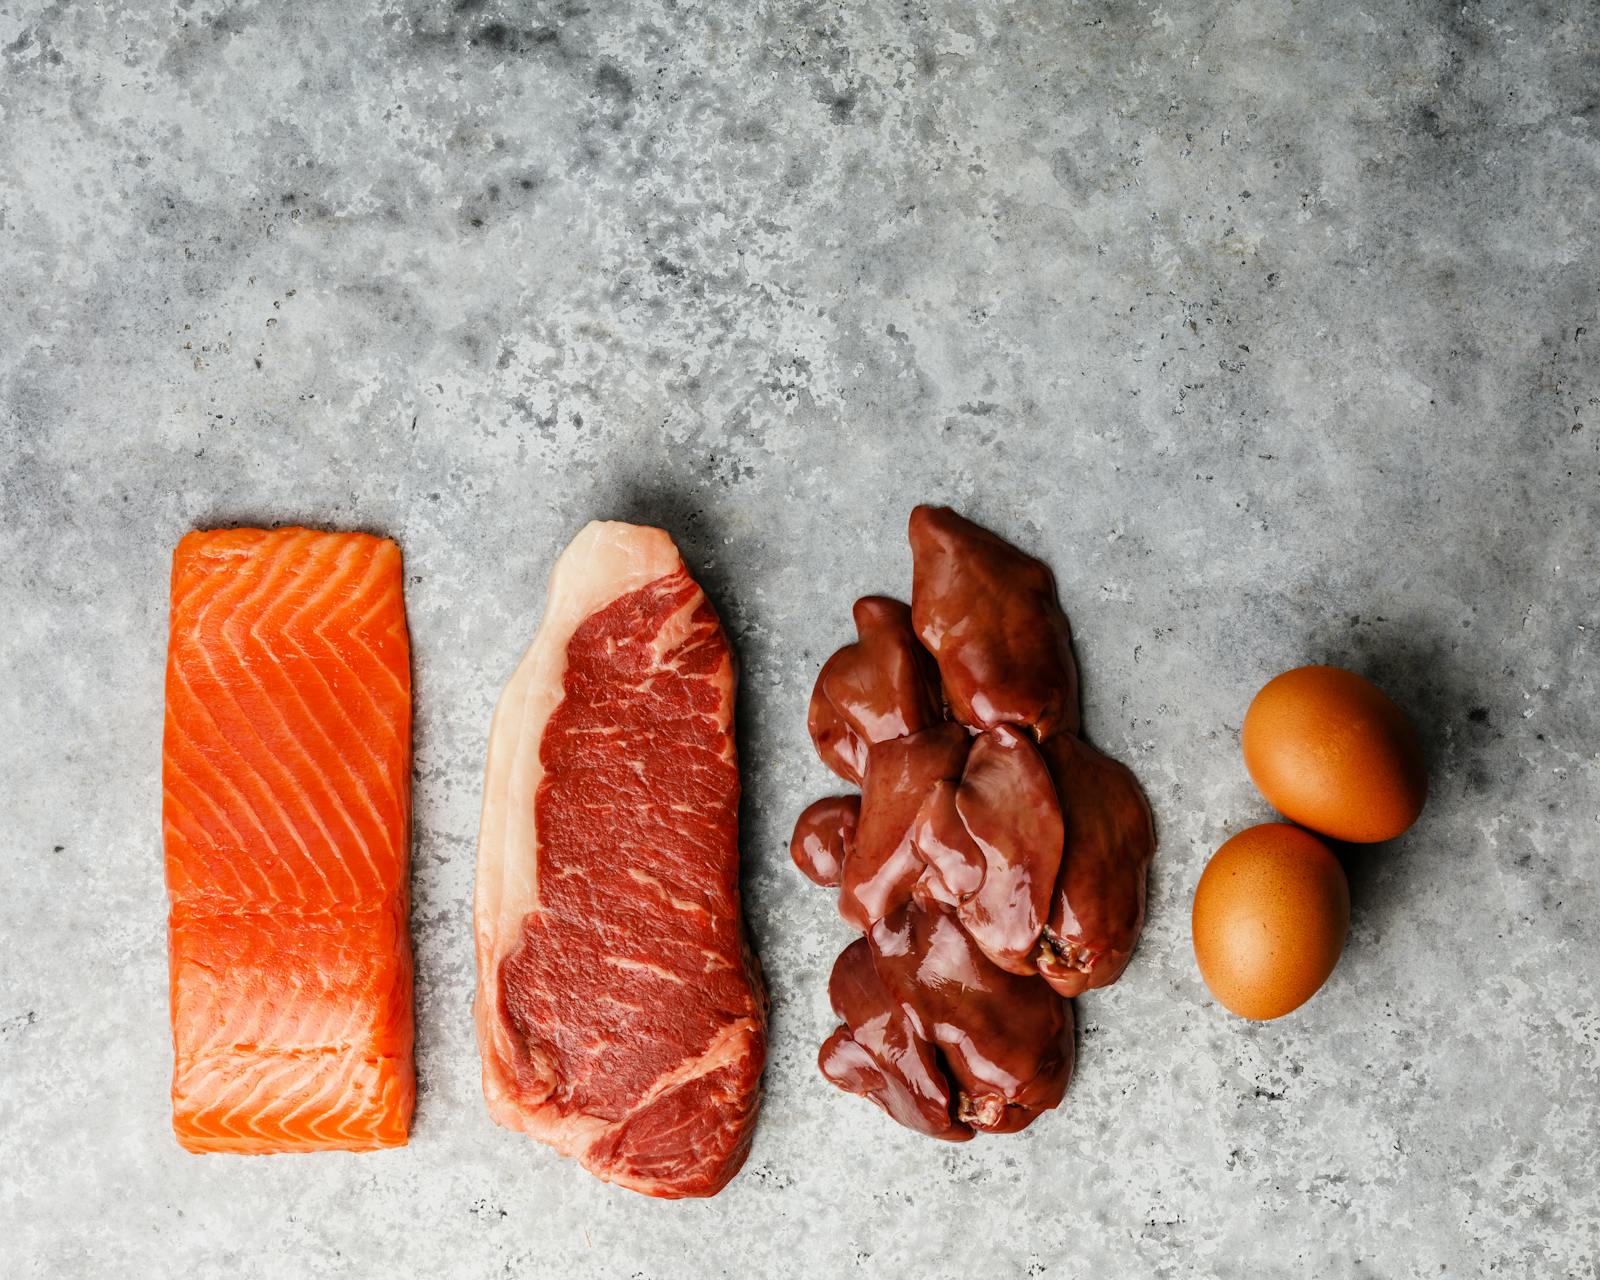 The Carnivore Diet: Is It Healthy and What Do You Eat? — Diet Doctor